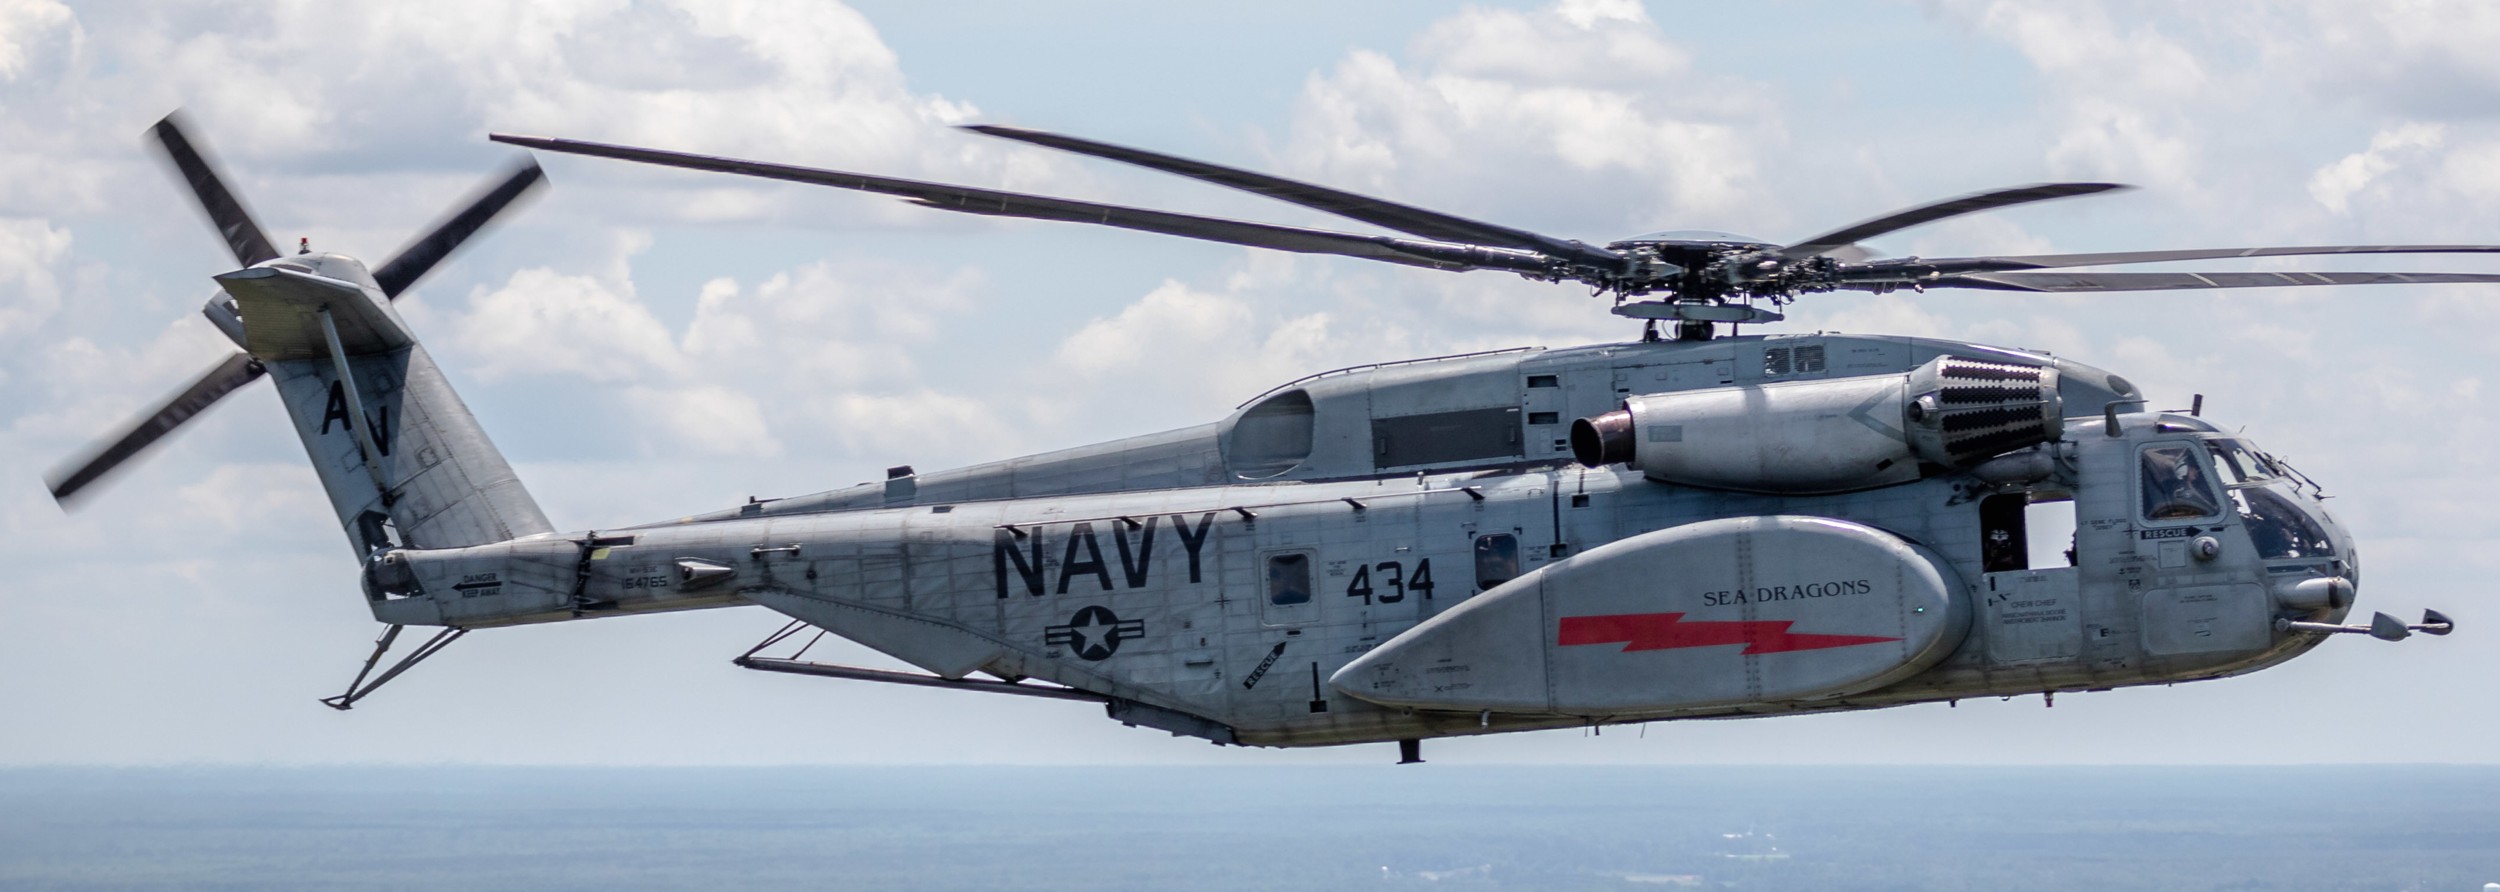 hm-12 sea dragons helicopter mine countermeasures squadron navy mh-53d 36